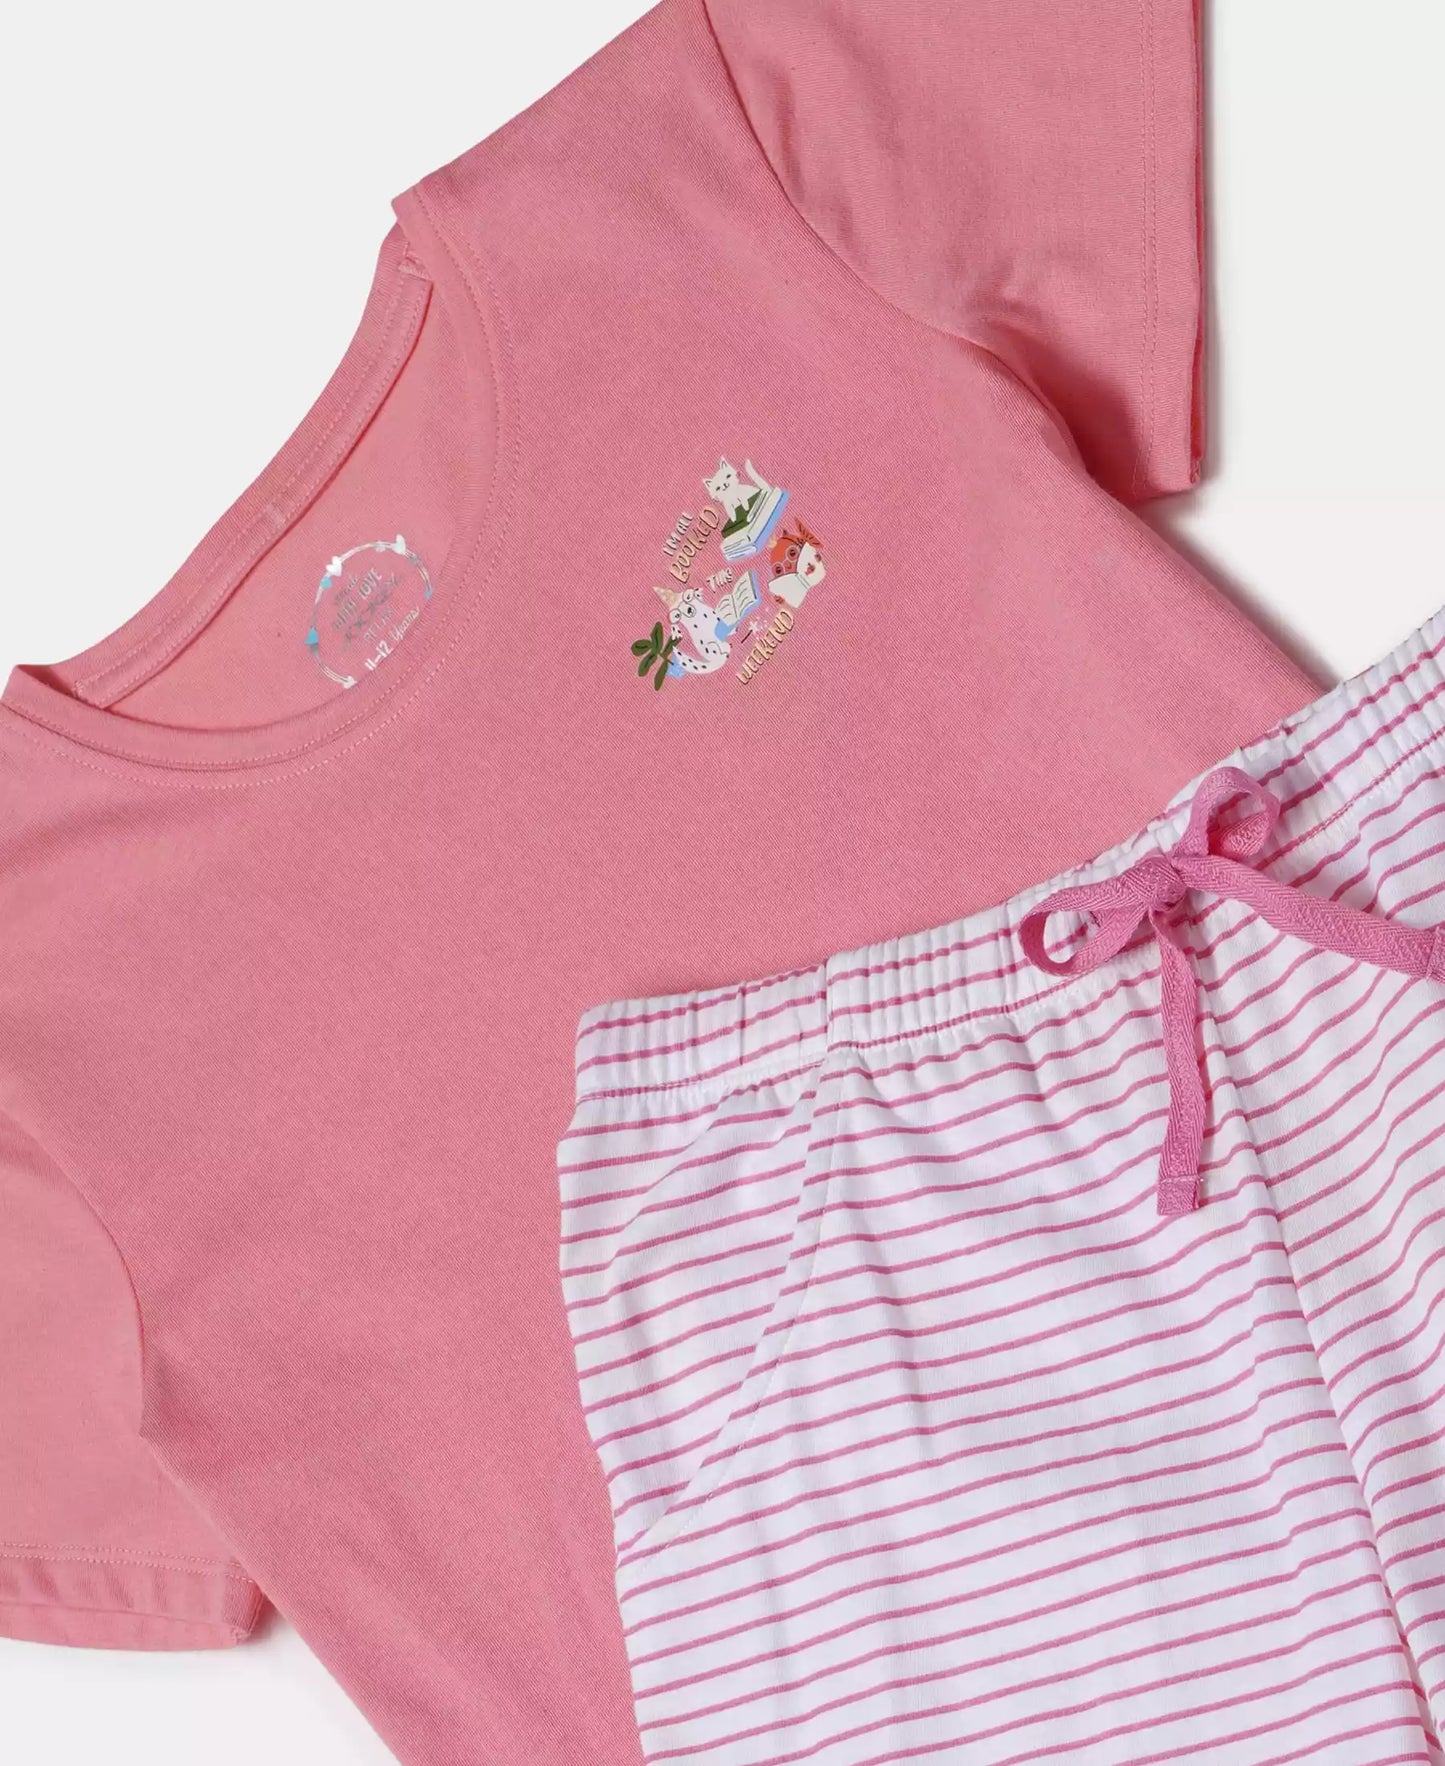 Super Combed Cotton Short Sleeve T-Shirt and Printed Shorts Set - White-Flamingo Pink